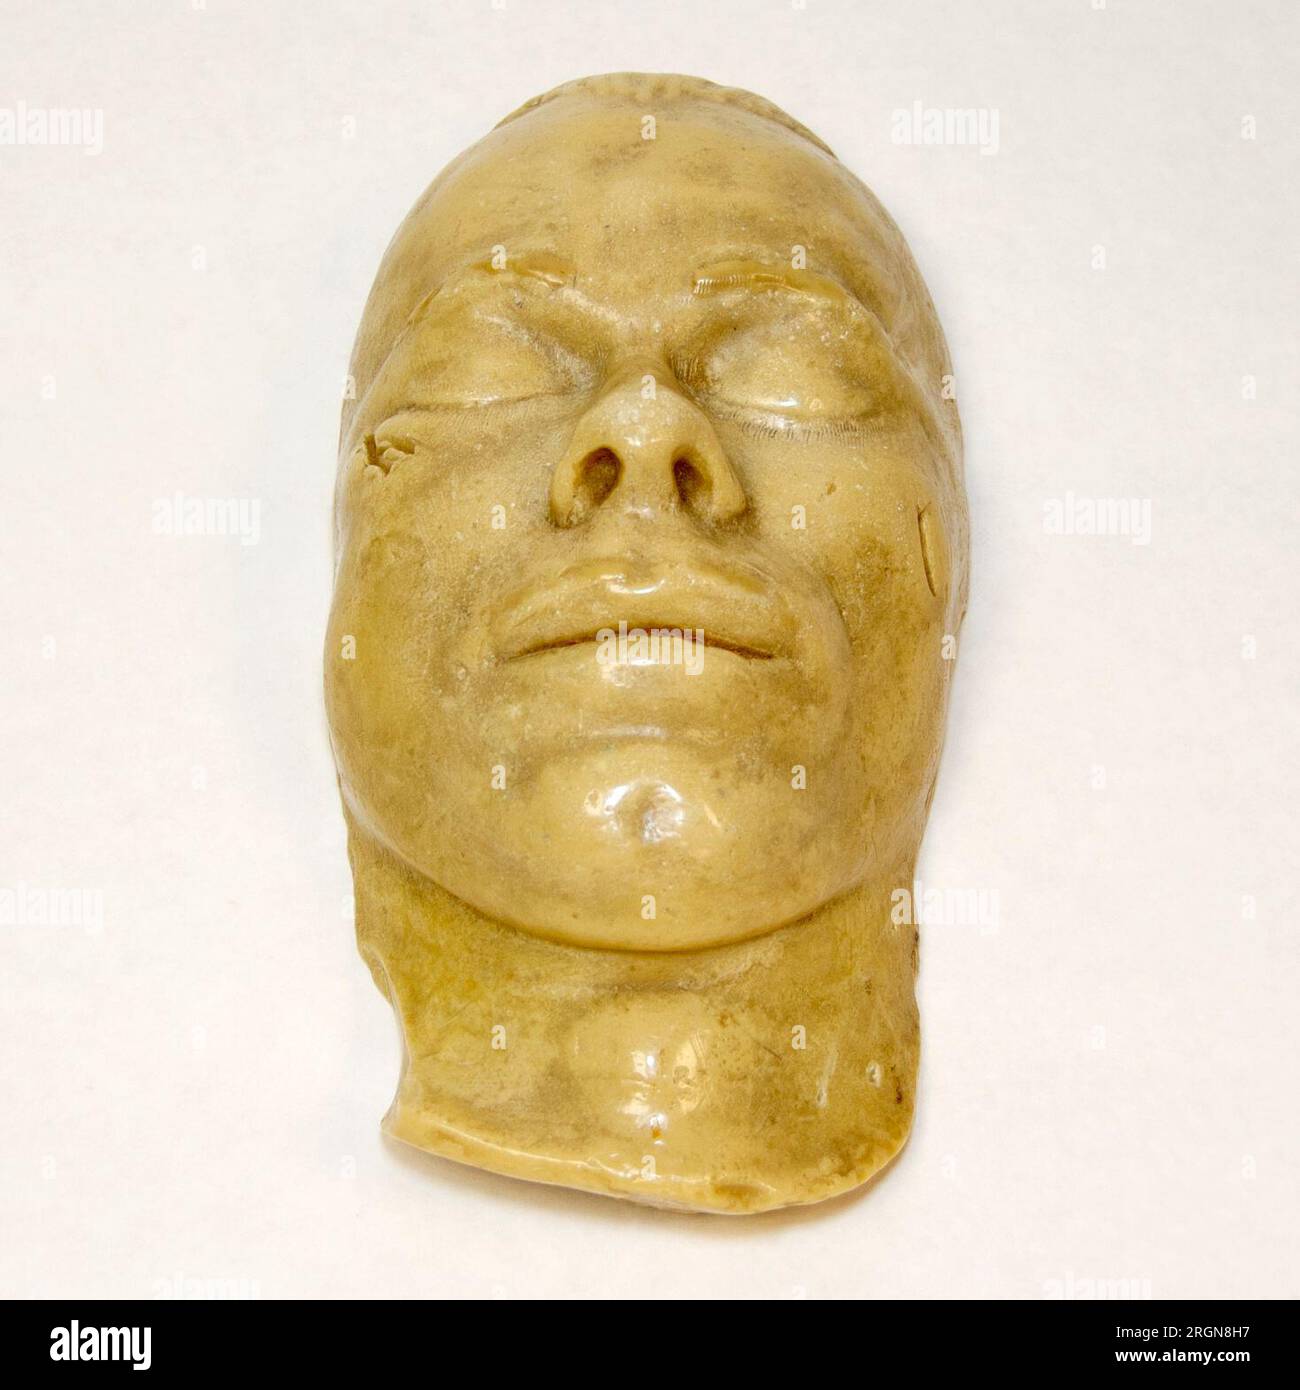 FBI History: The death mask of John Dillinger. Dillinger’s death is often described as the beginning of the end of the Gangster Era. Stock Photo